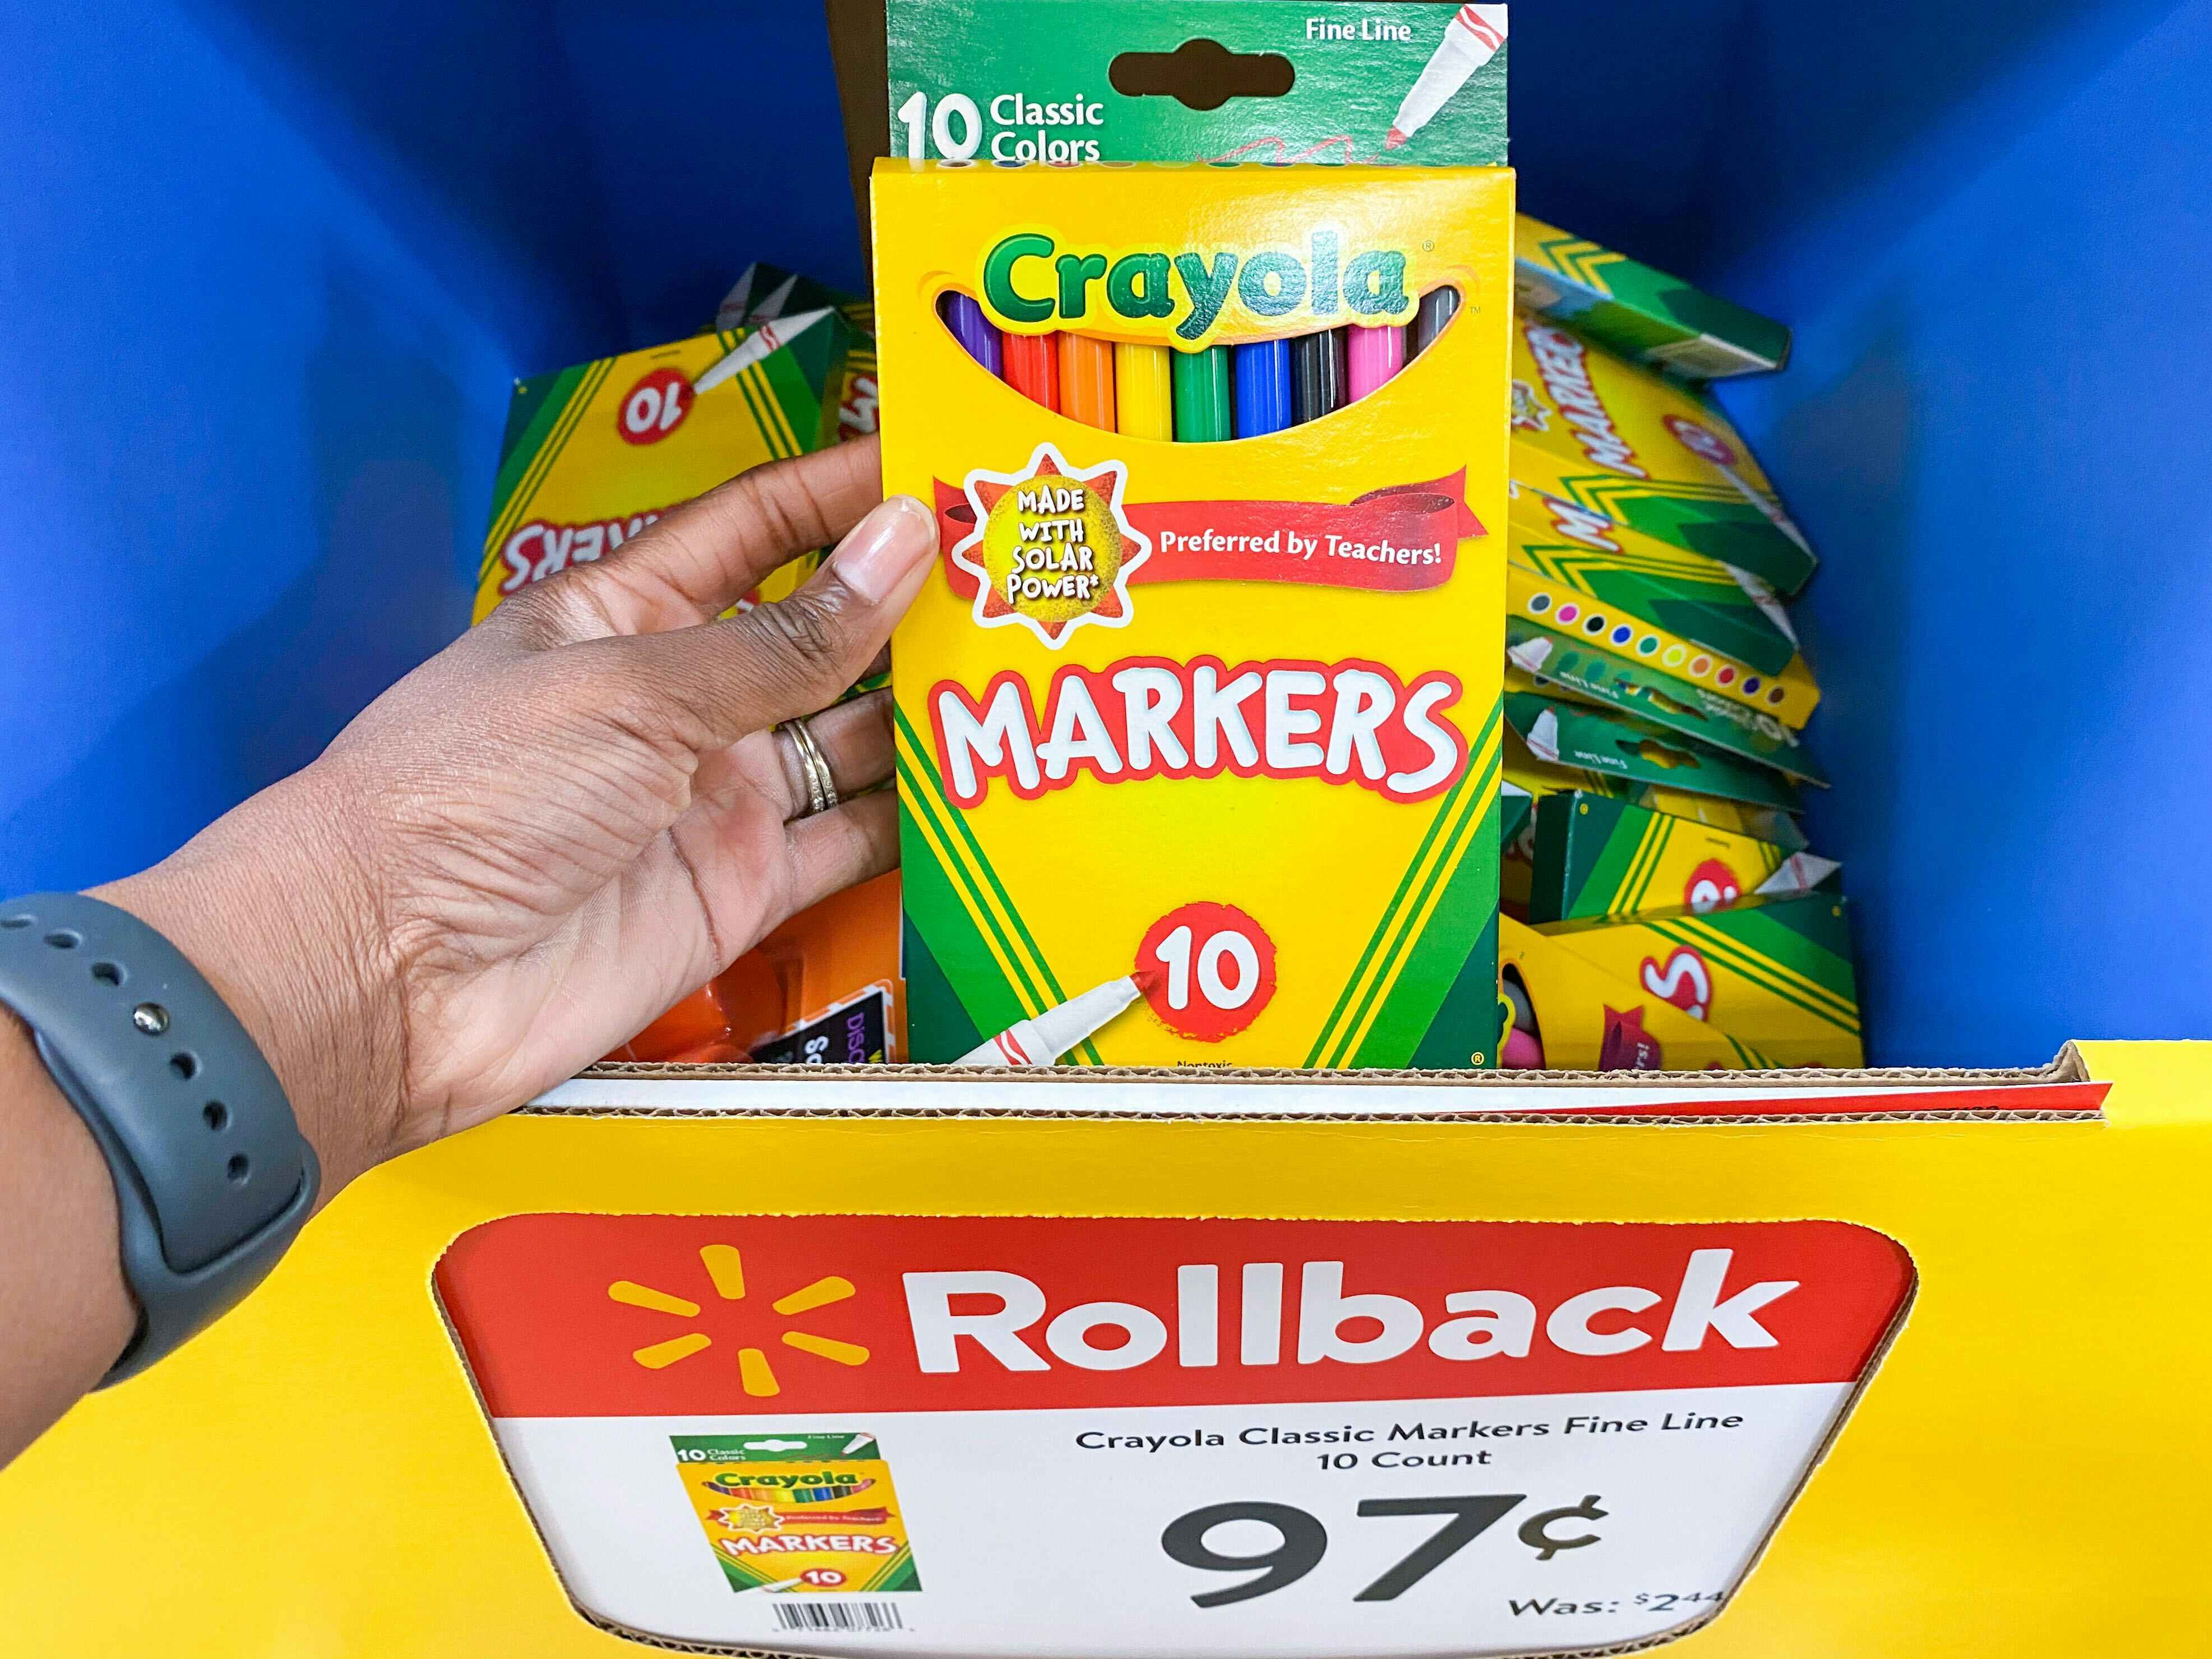 A person's hand holding a box of Crayola markers above a bin of them with a sale sign showing them to be 97 cents each.